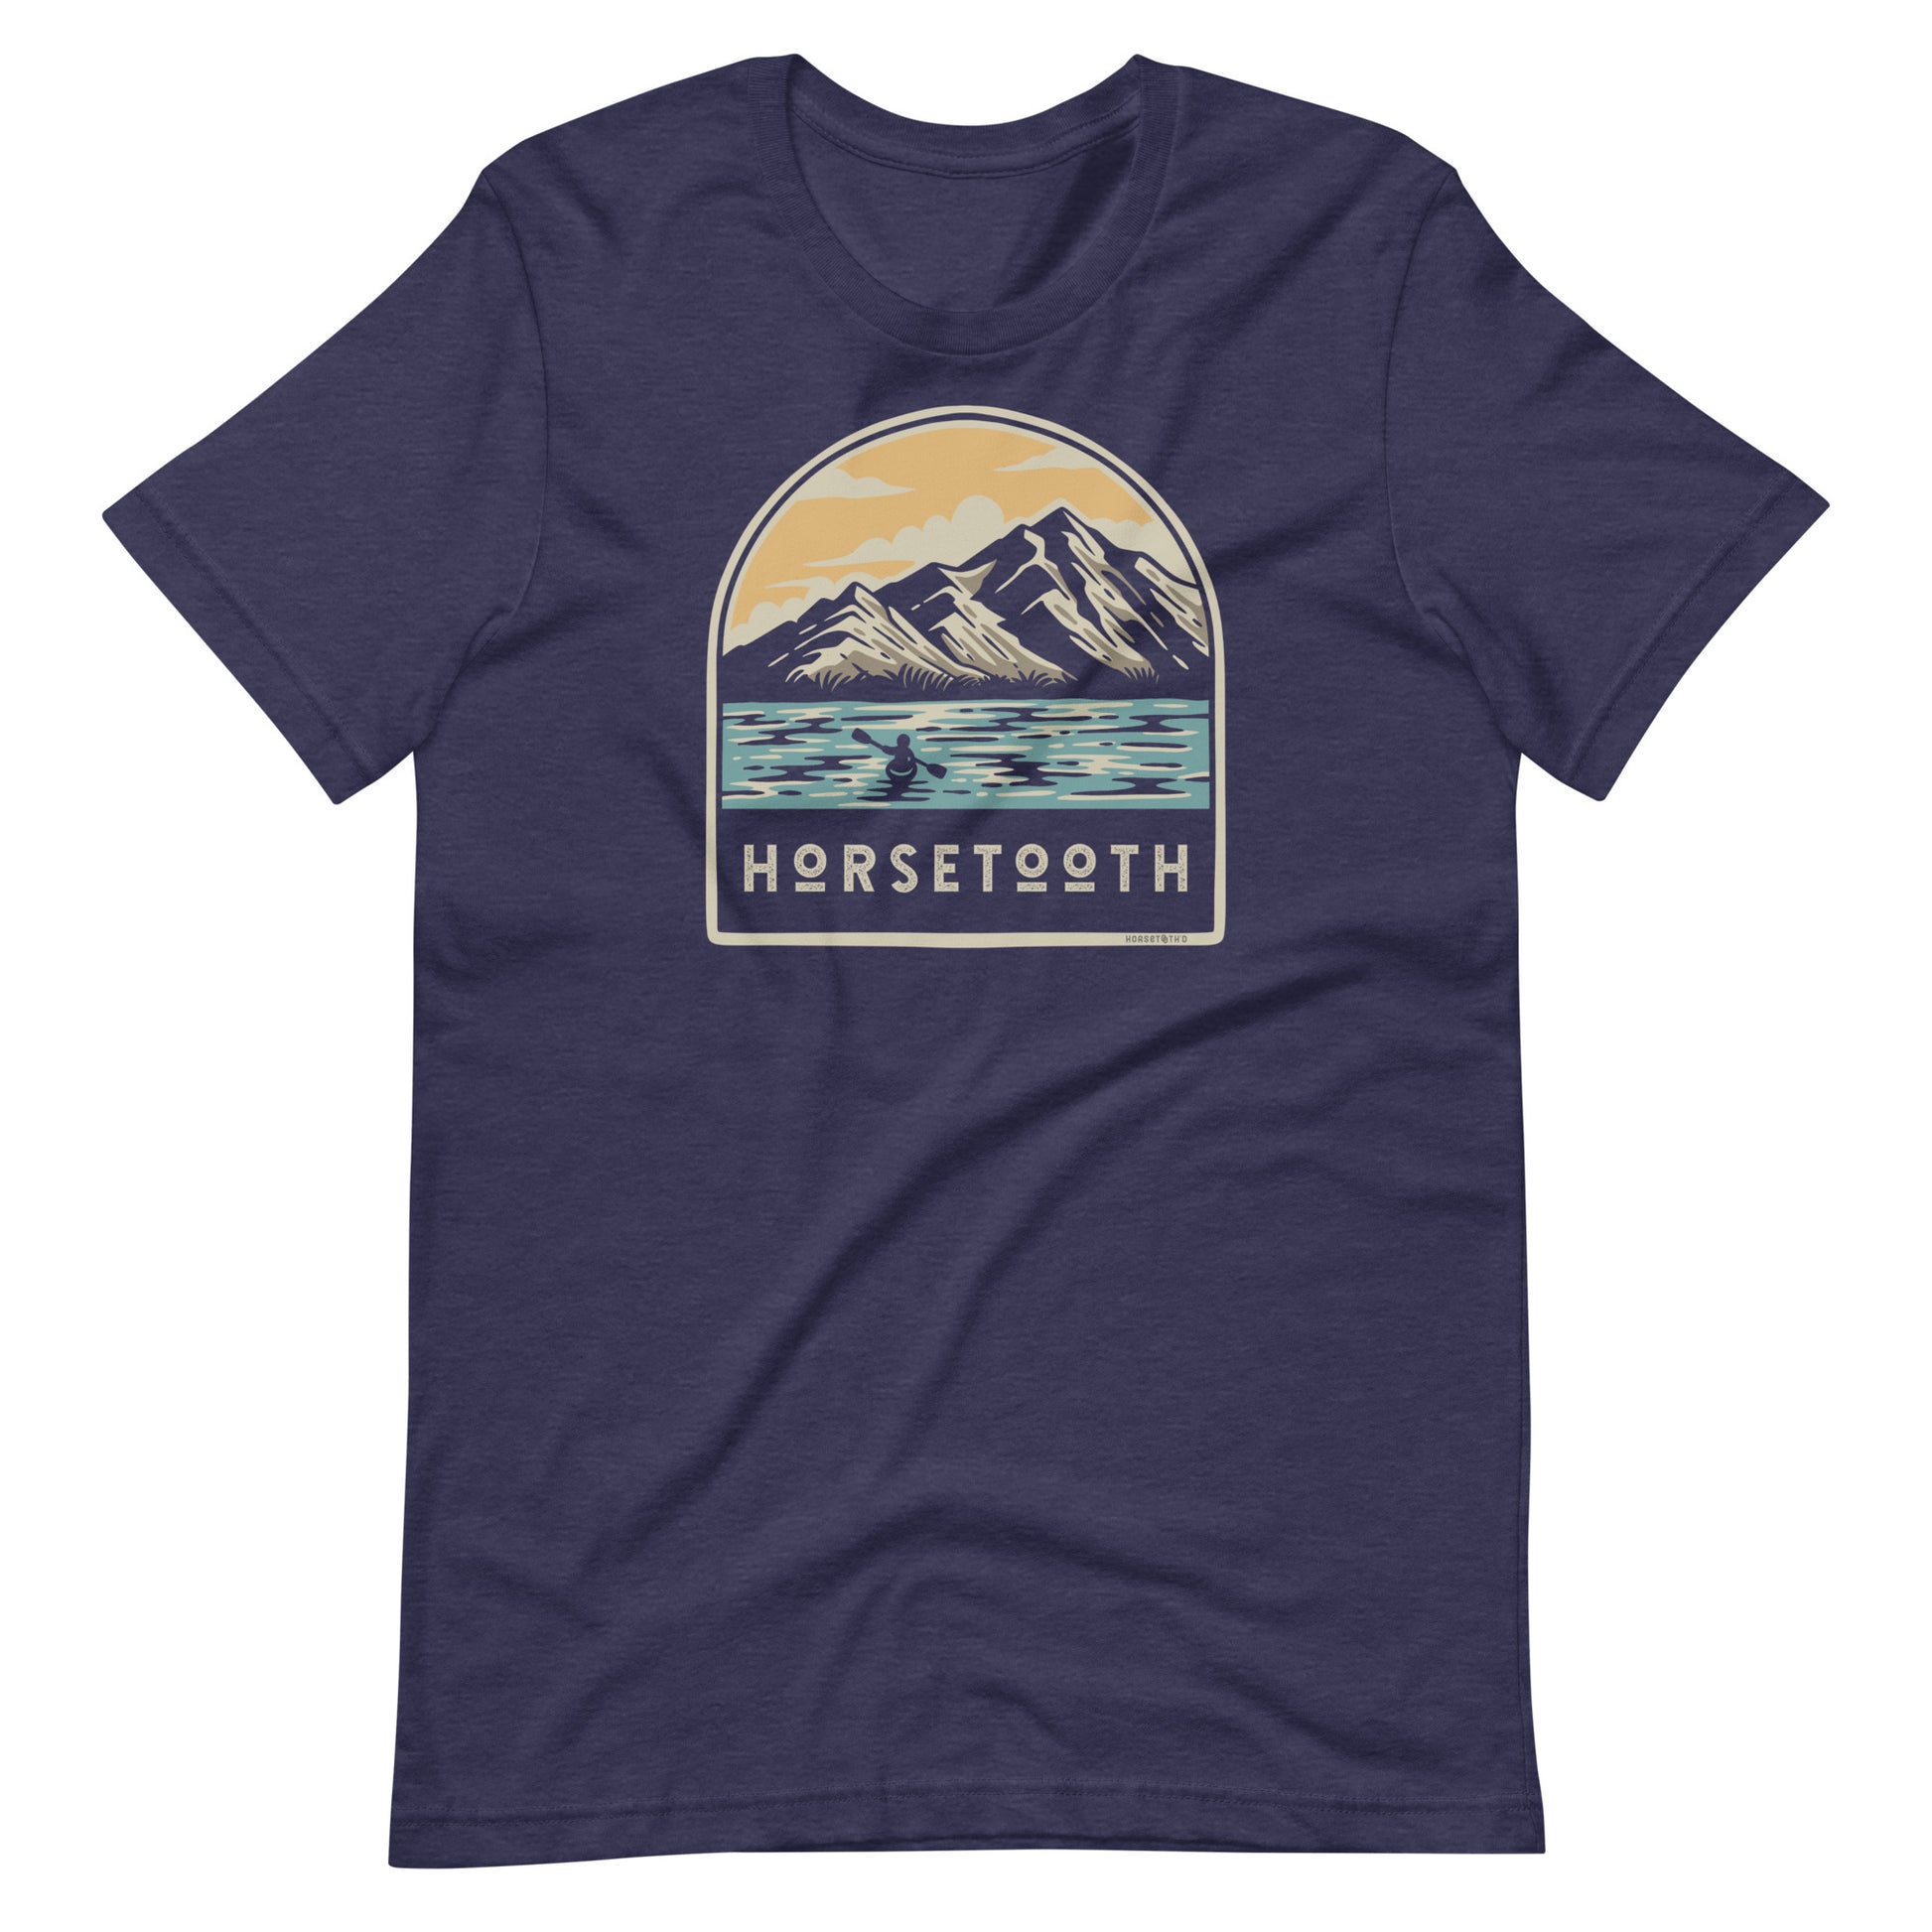 Bella Canvas 3001 t-shirt in Heather color with an artistic depiction of kayaking on Horsetooth Reservoir